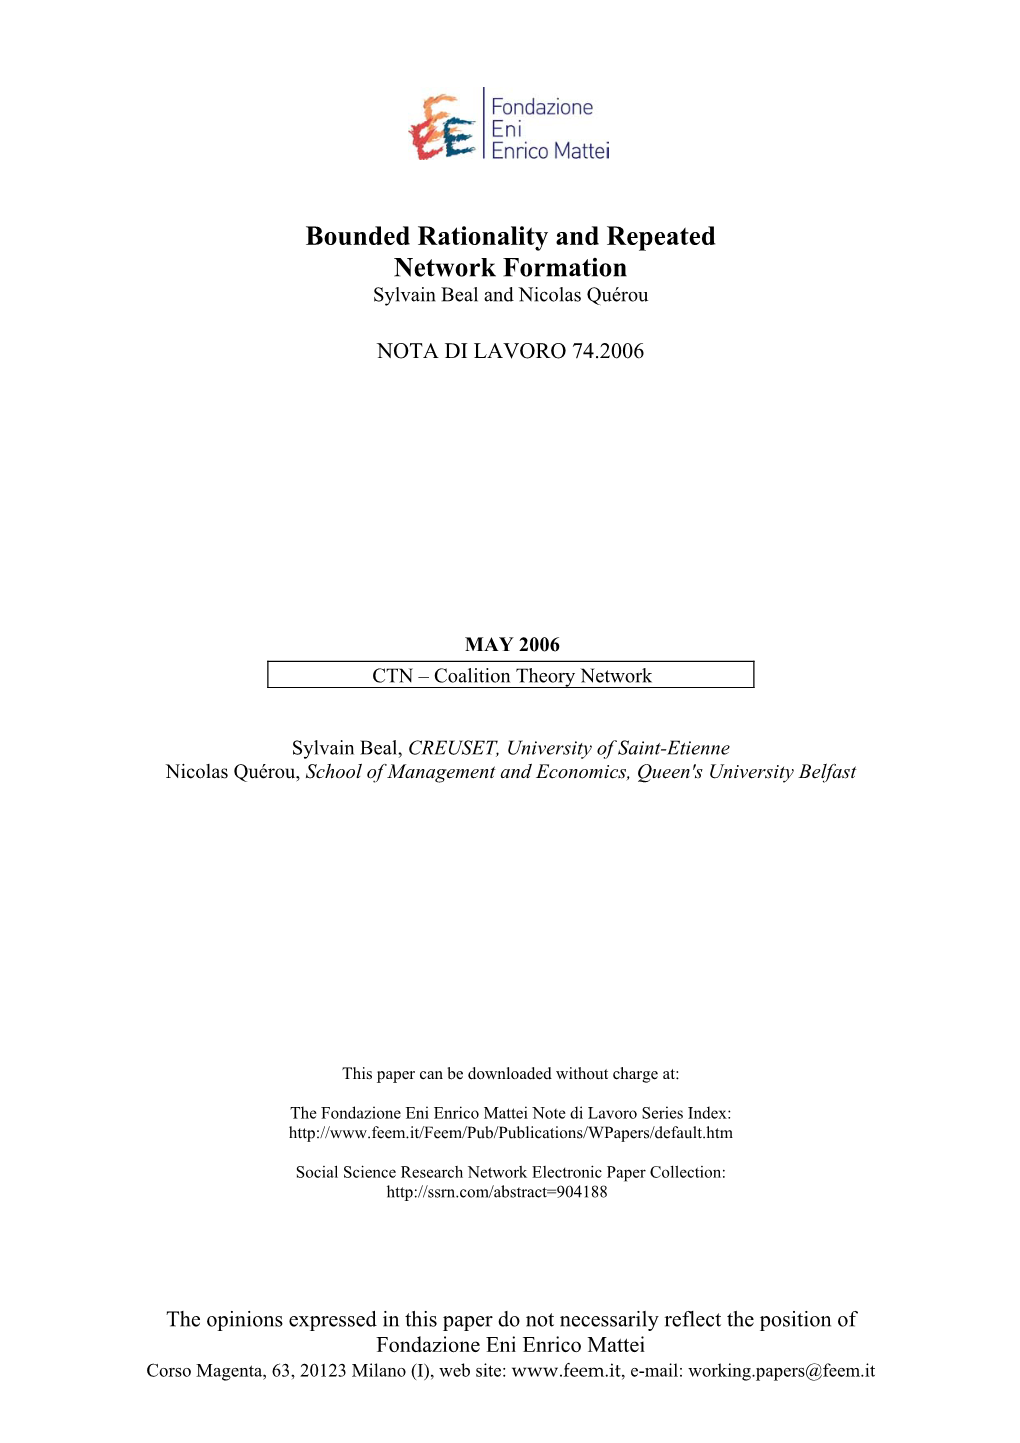 Bounded Rationality and Repeated Network Formation Sylvain Beal and Nicolas Quérou